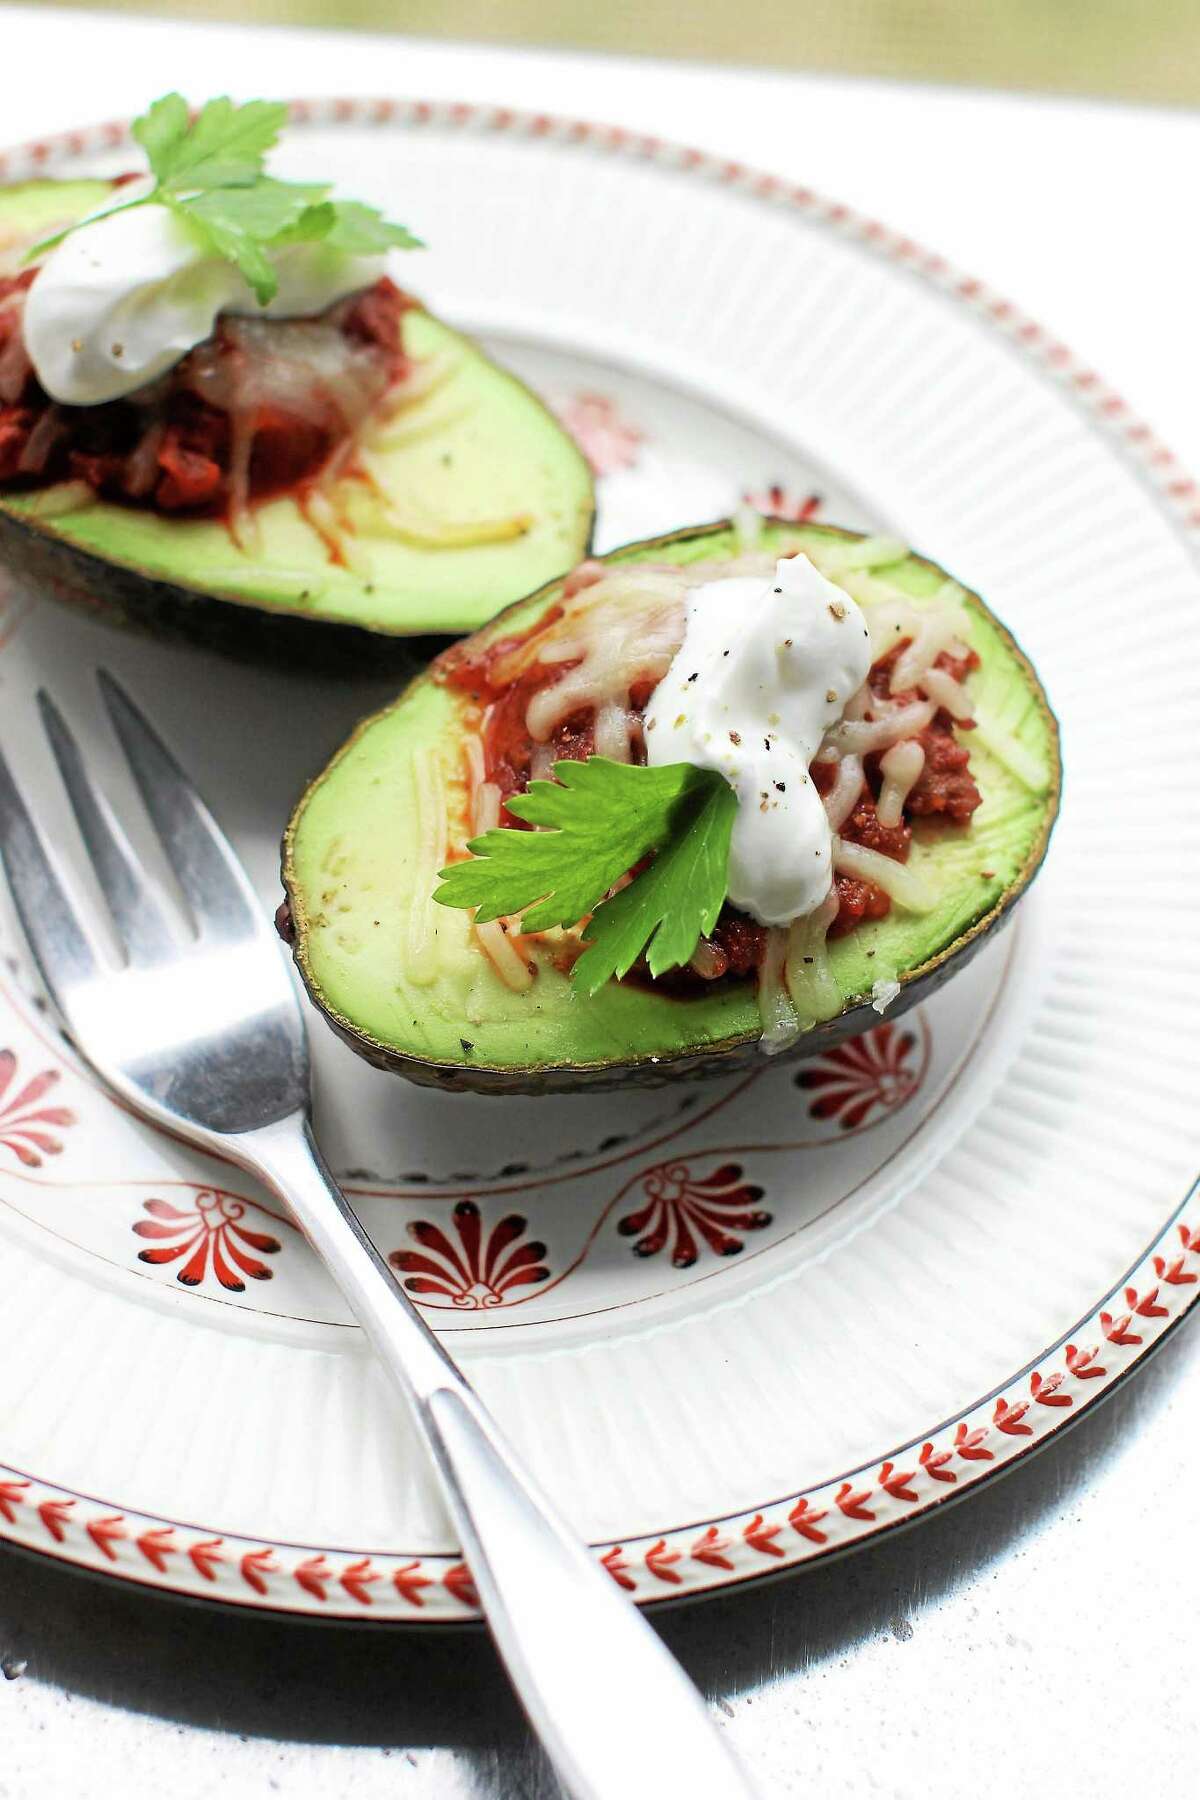 Chili-Stuffed Avocados spend only 5 minutes on the grill.